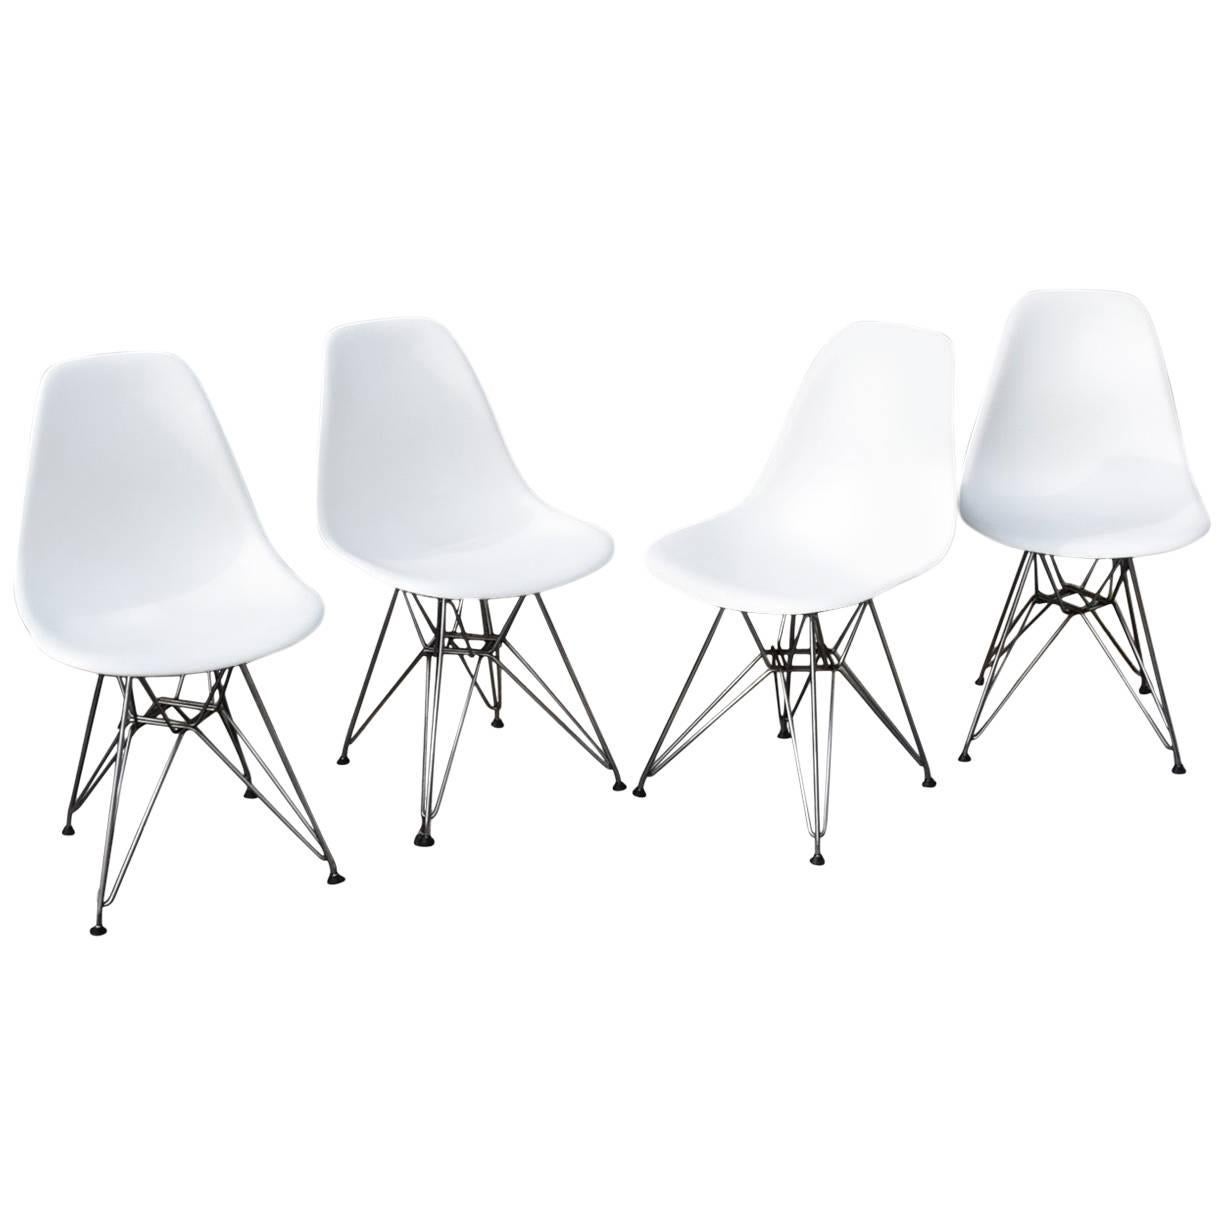 Eames Shell Chairs with Chrome Eiffel Tower Bases Midcentury